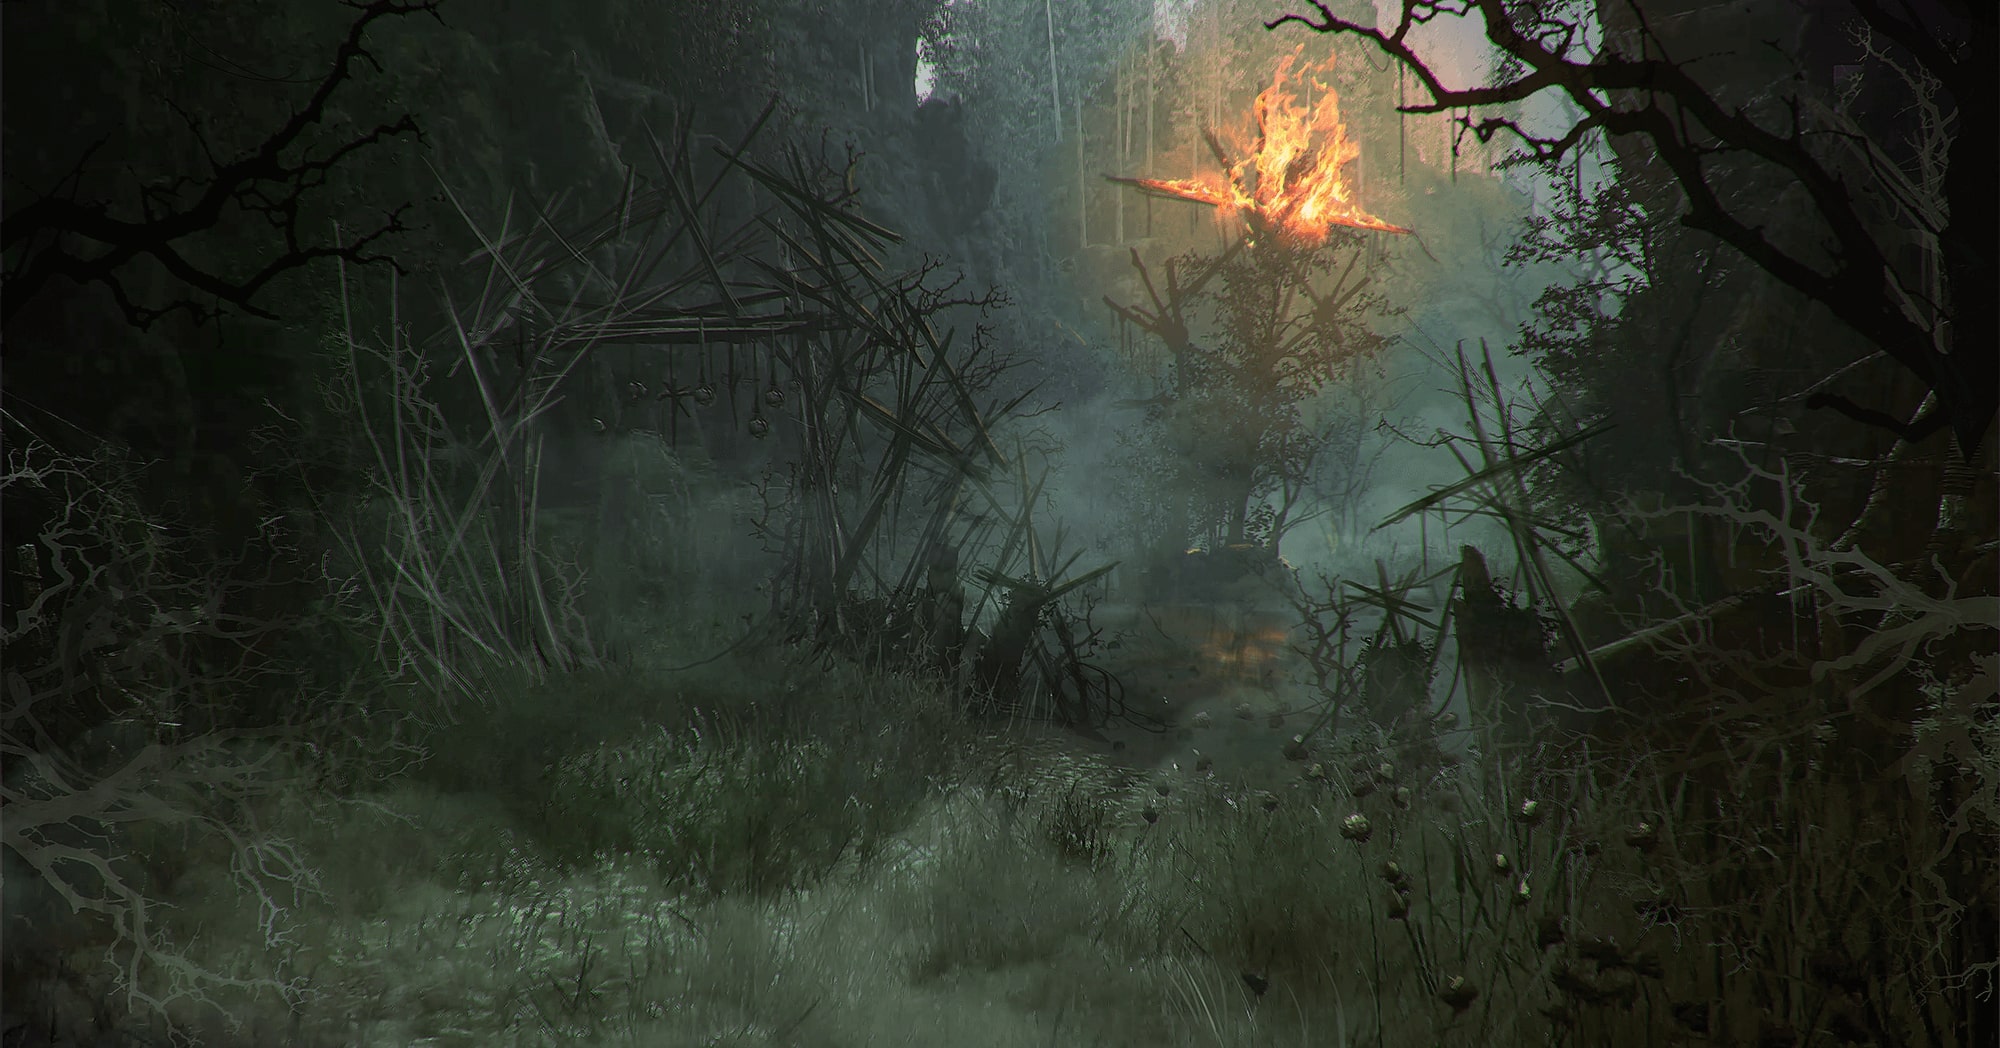 The entrance to the swamps are marked with the warnings in the world of The Lords of the Fallen